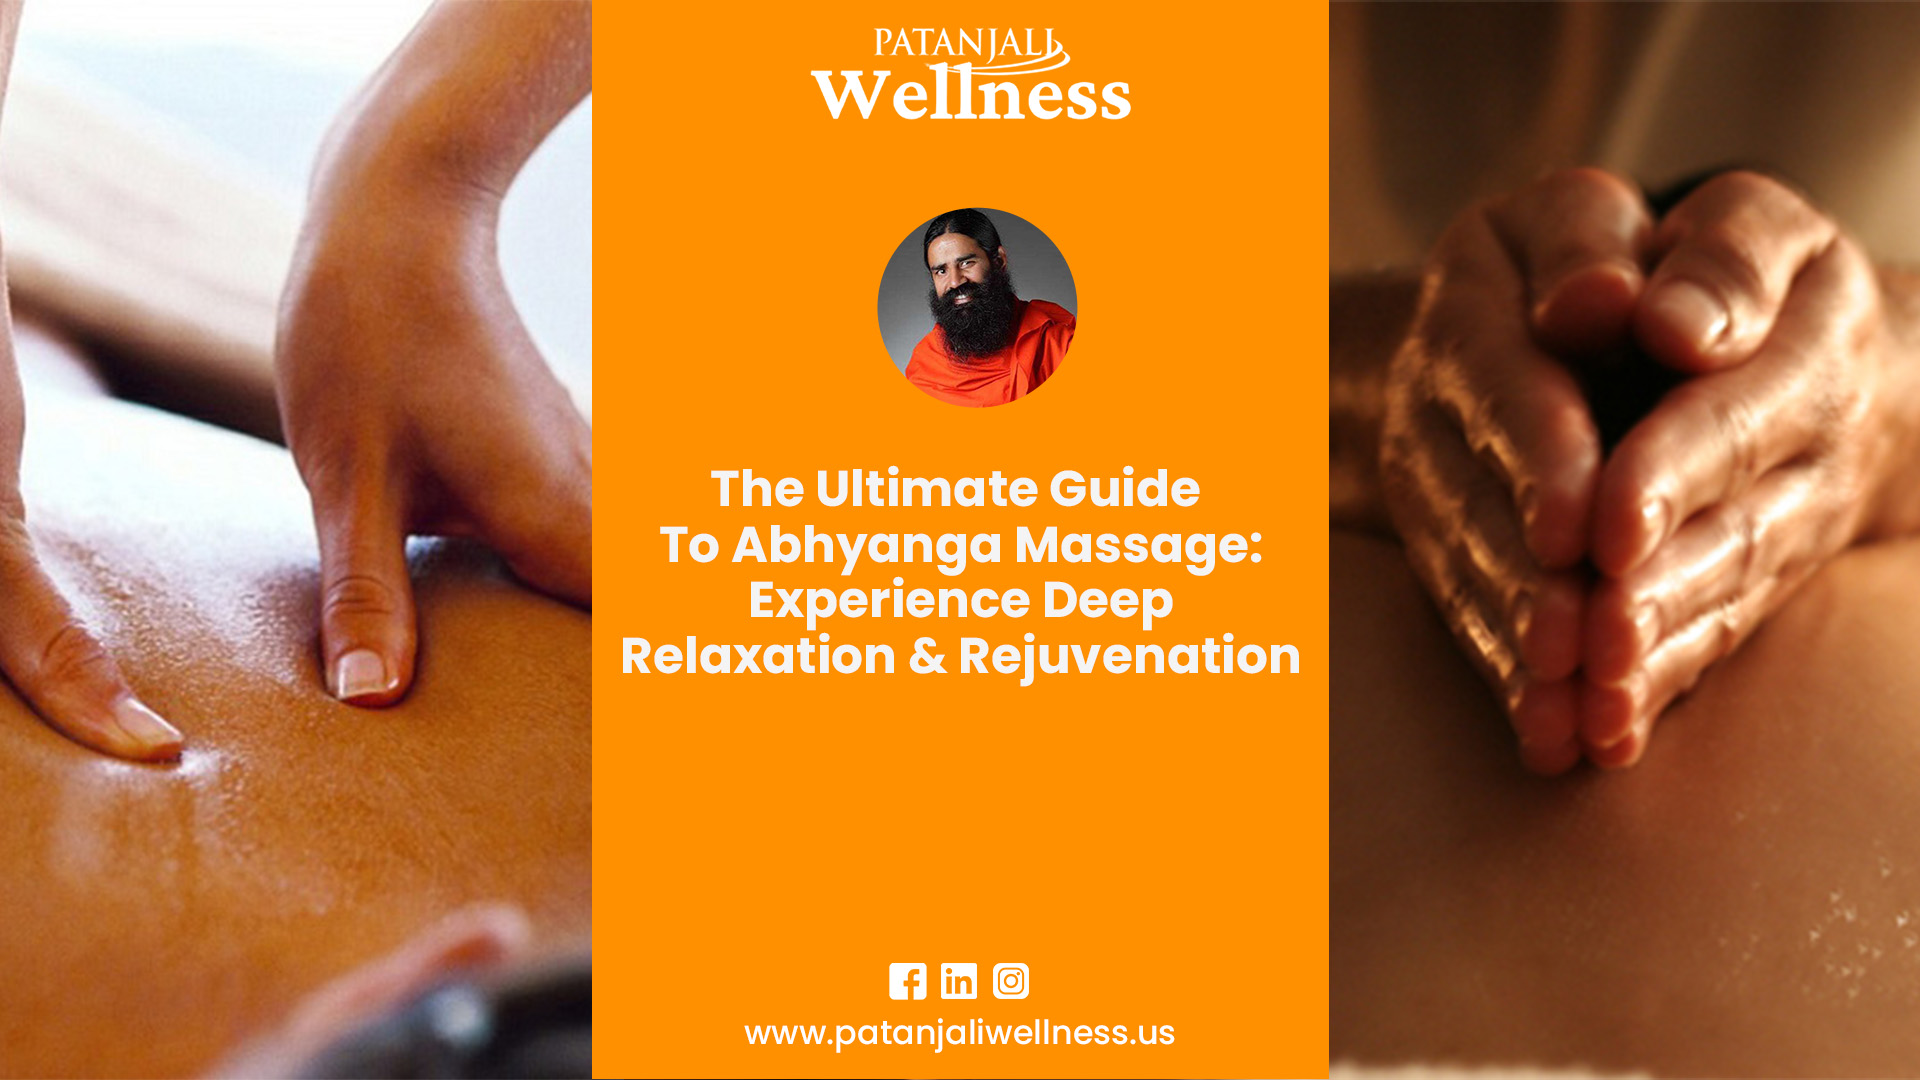 The Ultimate Guide to Abhyanga Massage_Experience Deep Relaxation and Rejuvenation